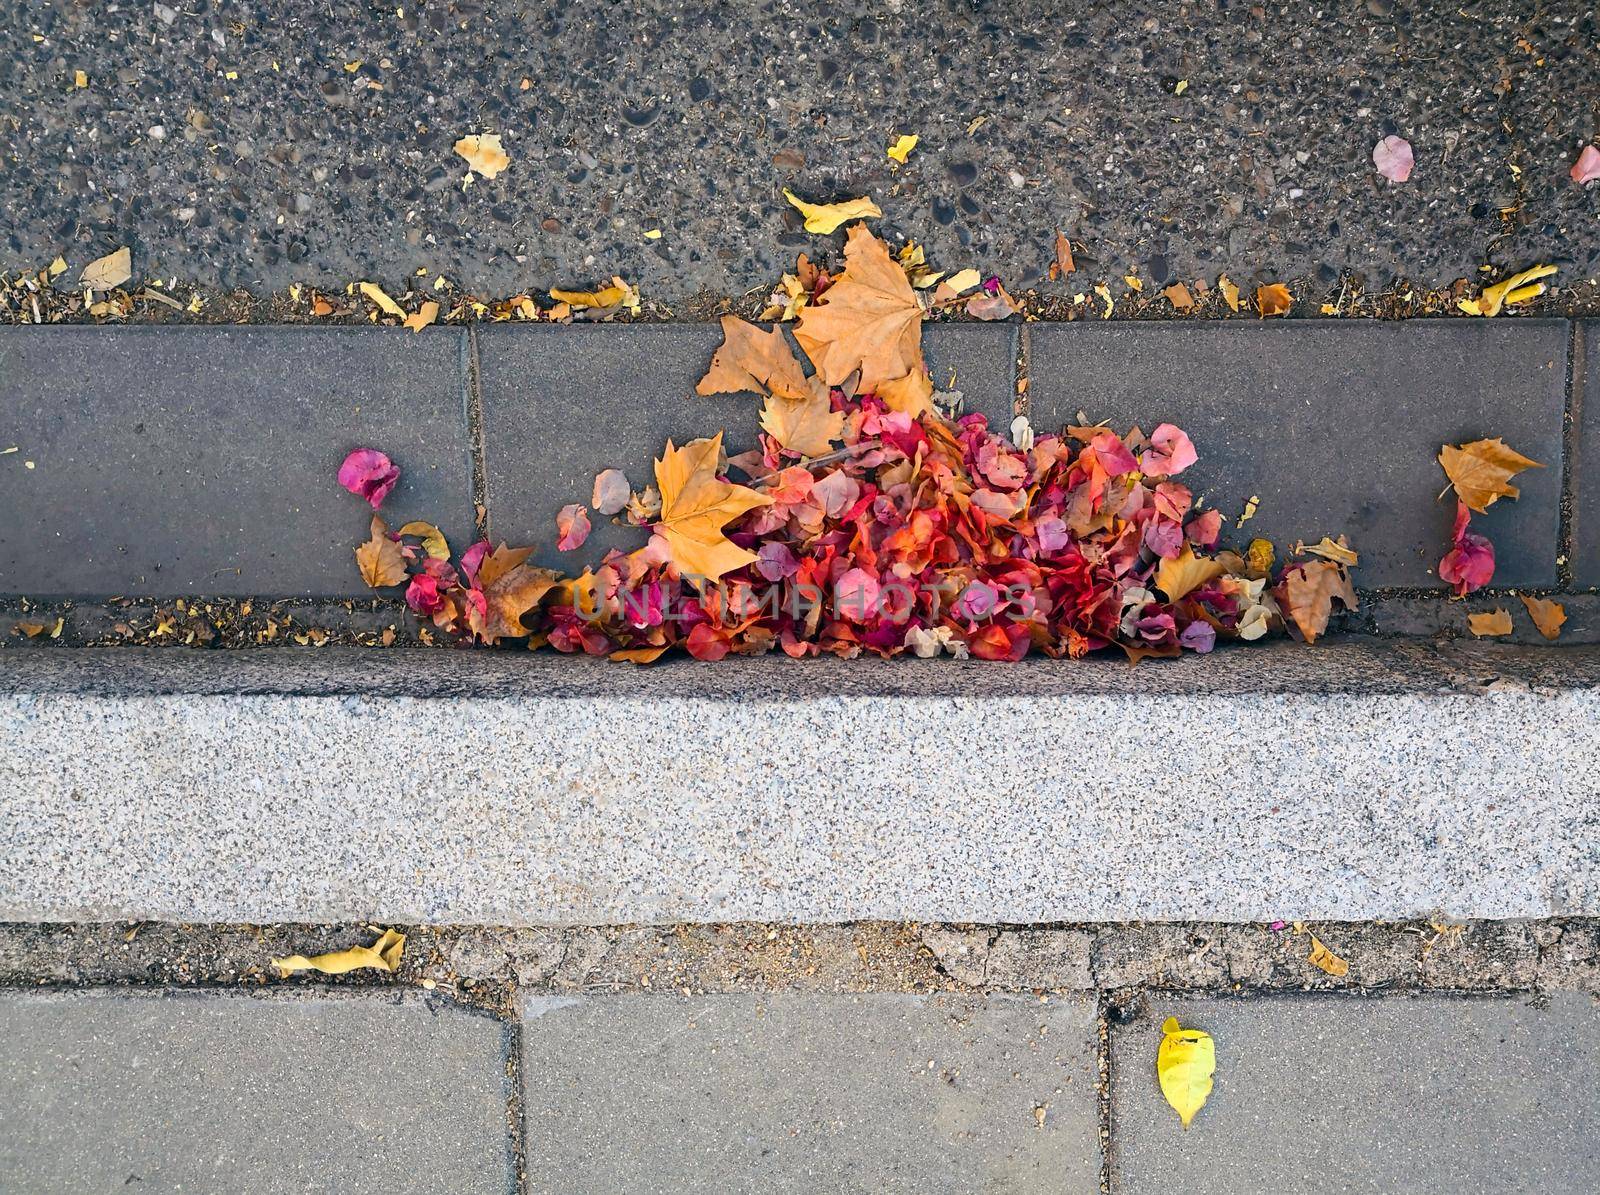 Multucolored autumn leaves and flowers on the asphalt near the curb